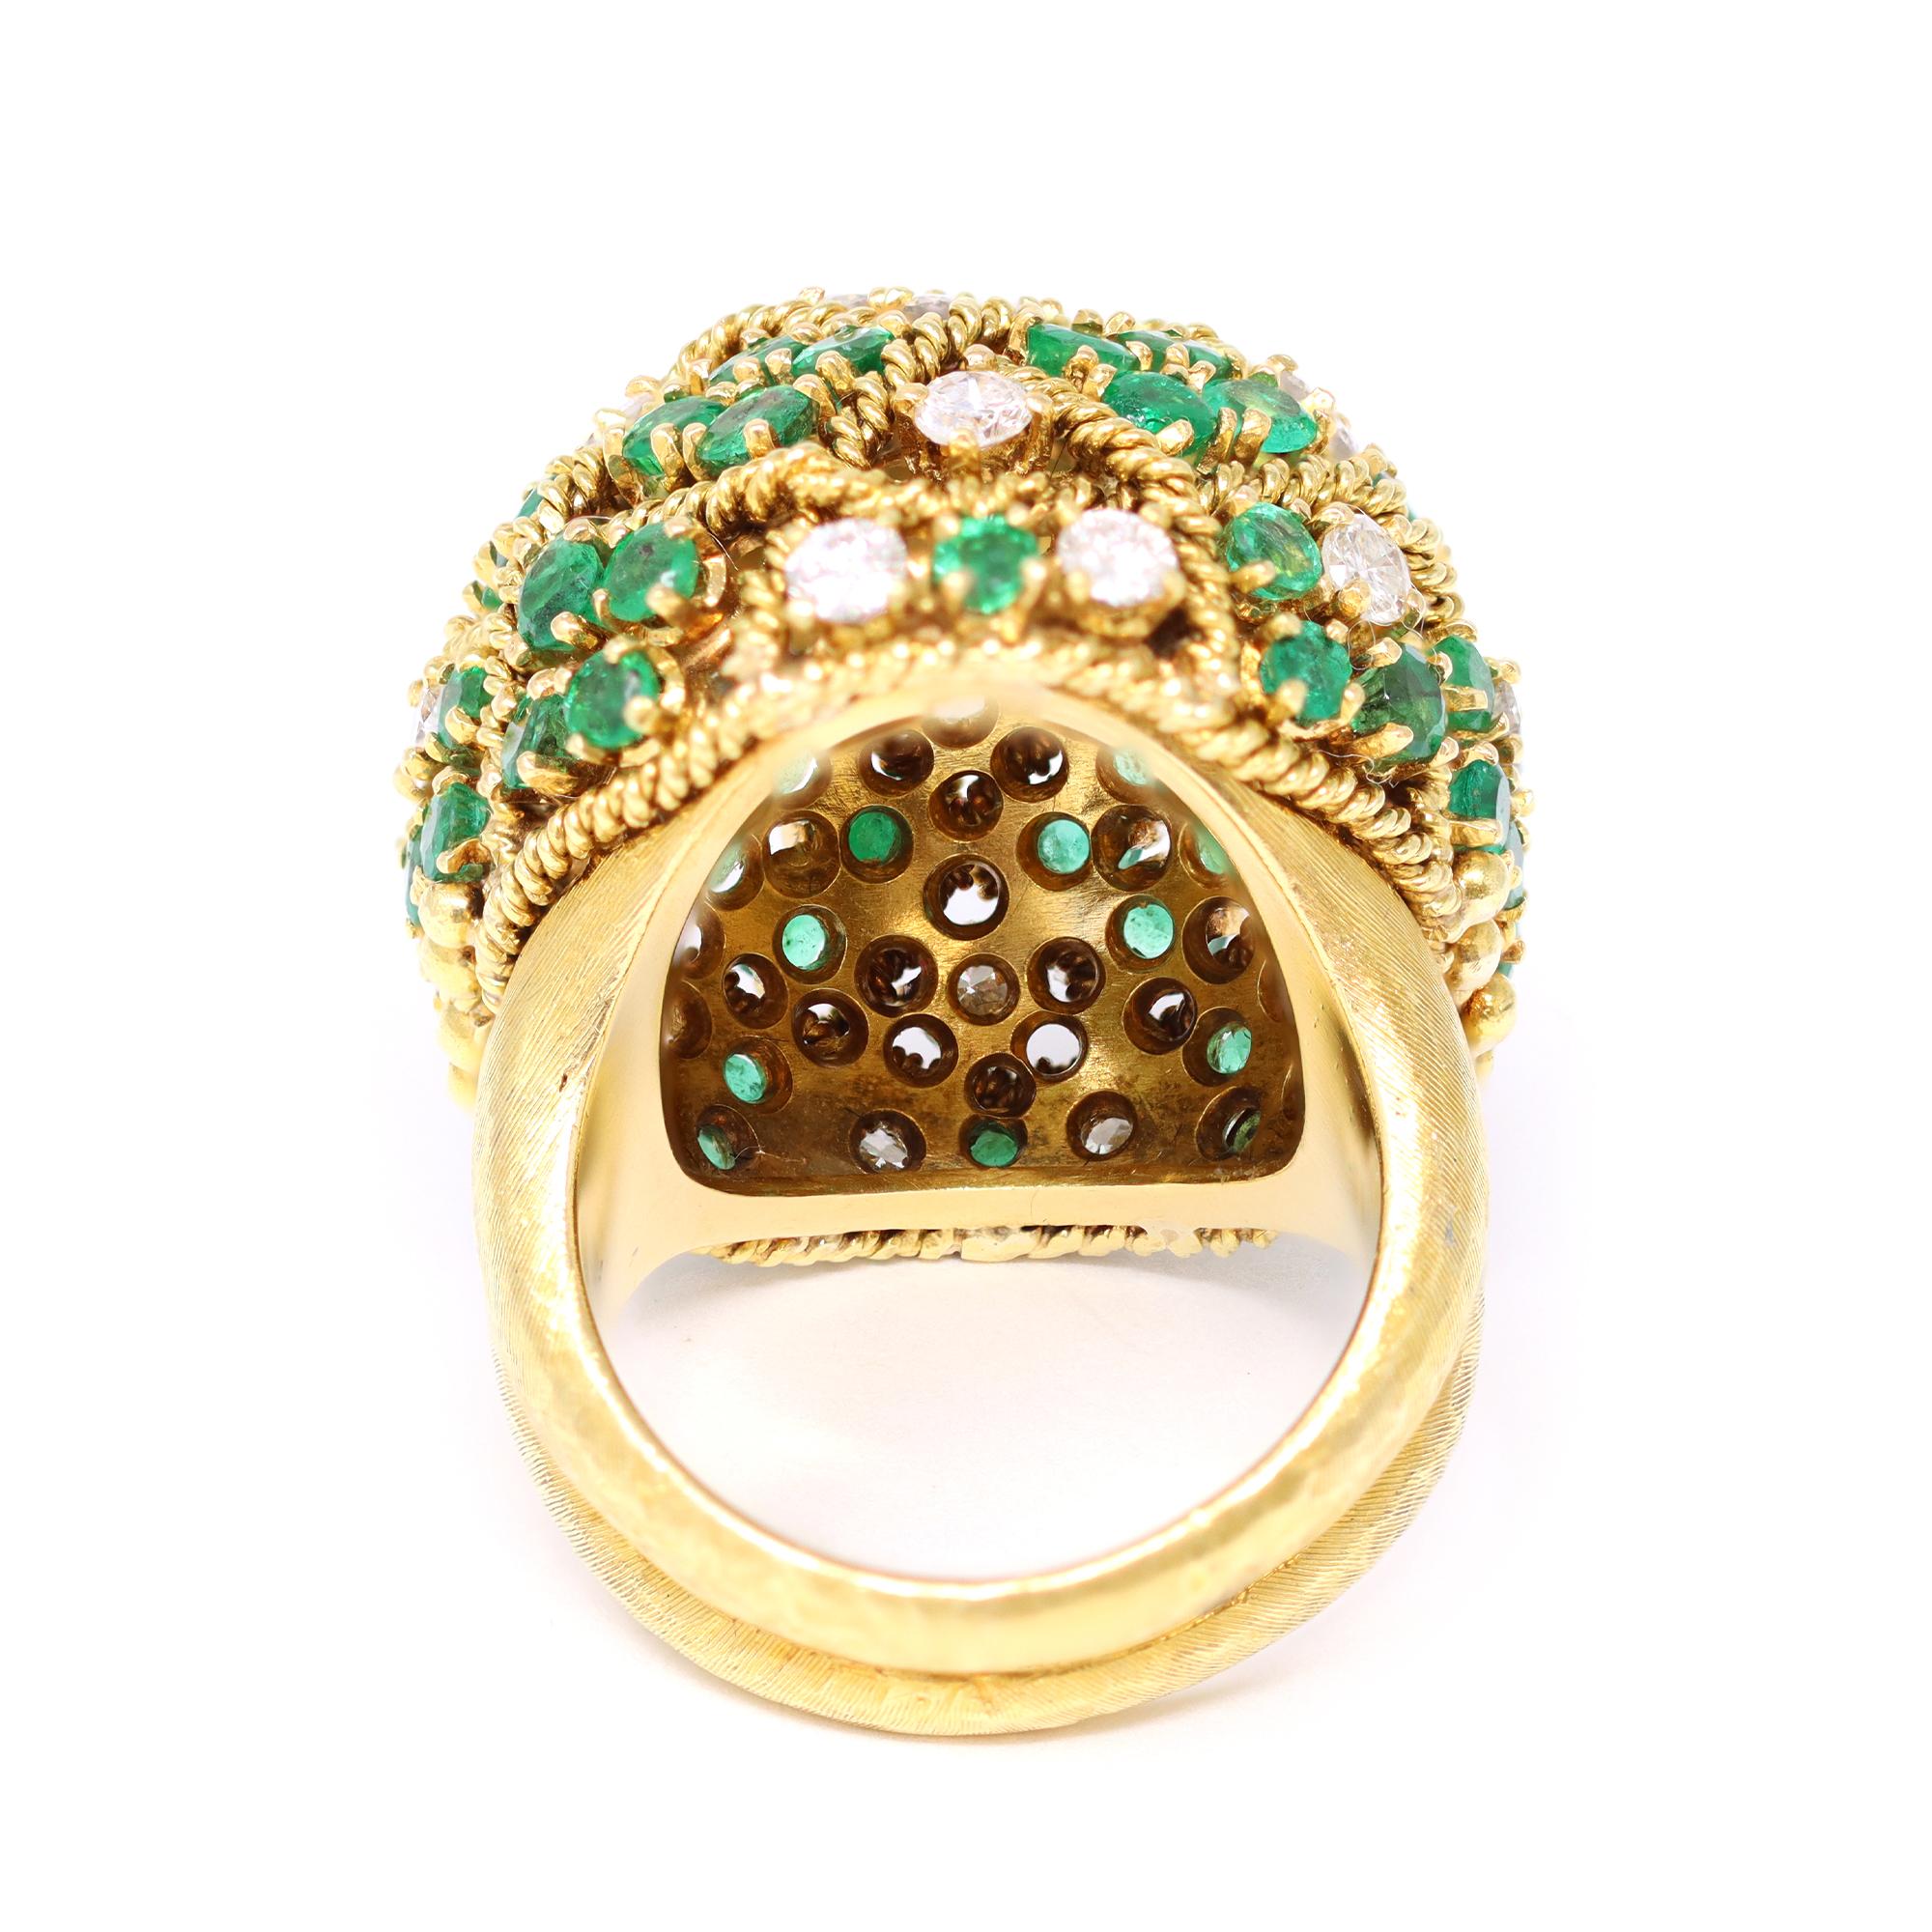 Emerald & Diamond Cocktail Ring set in 18k Yellow Gold In Excellent Condition For Sale In Miami, FL